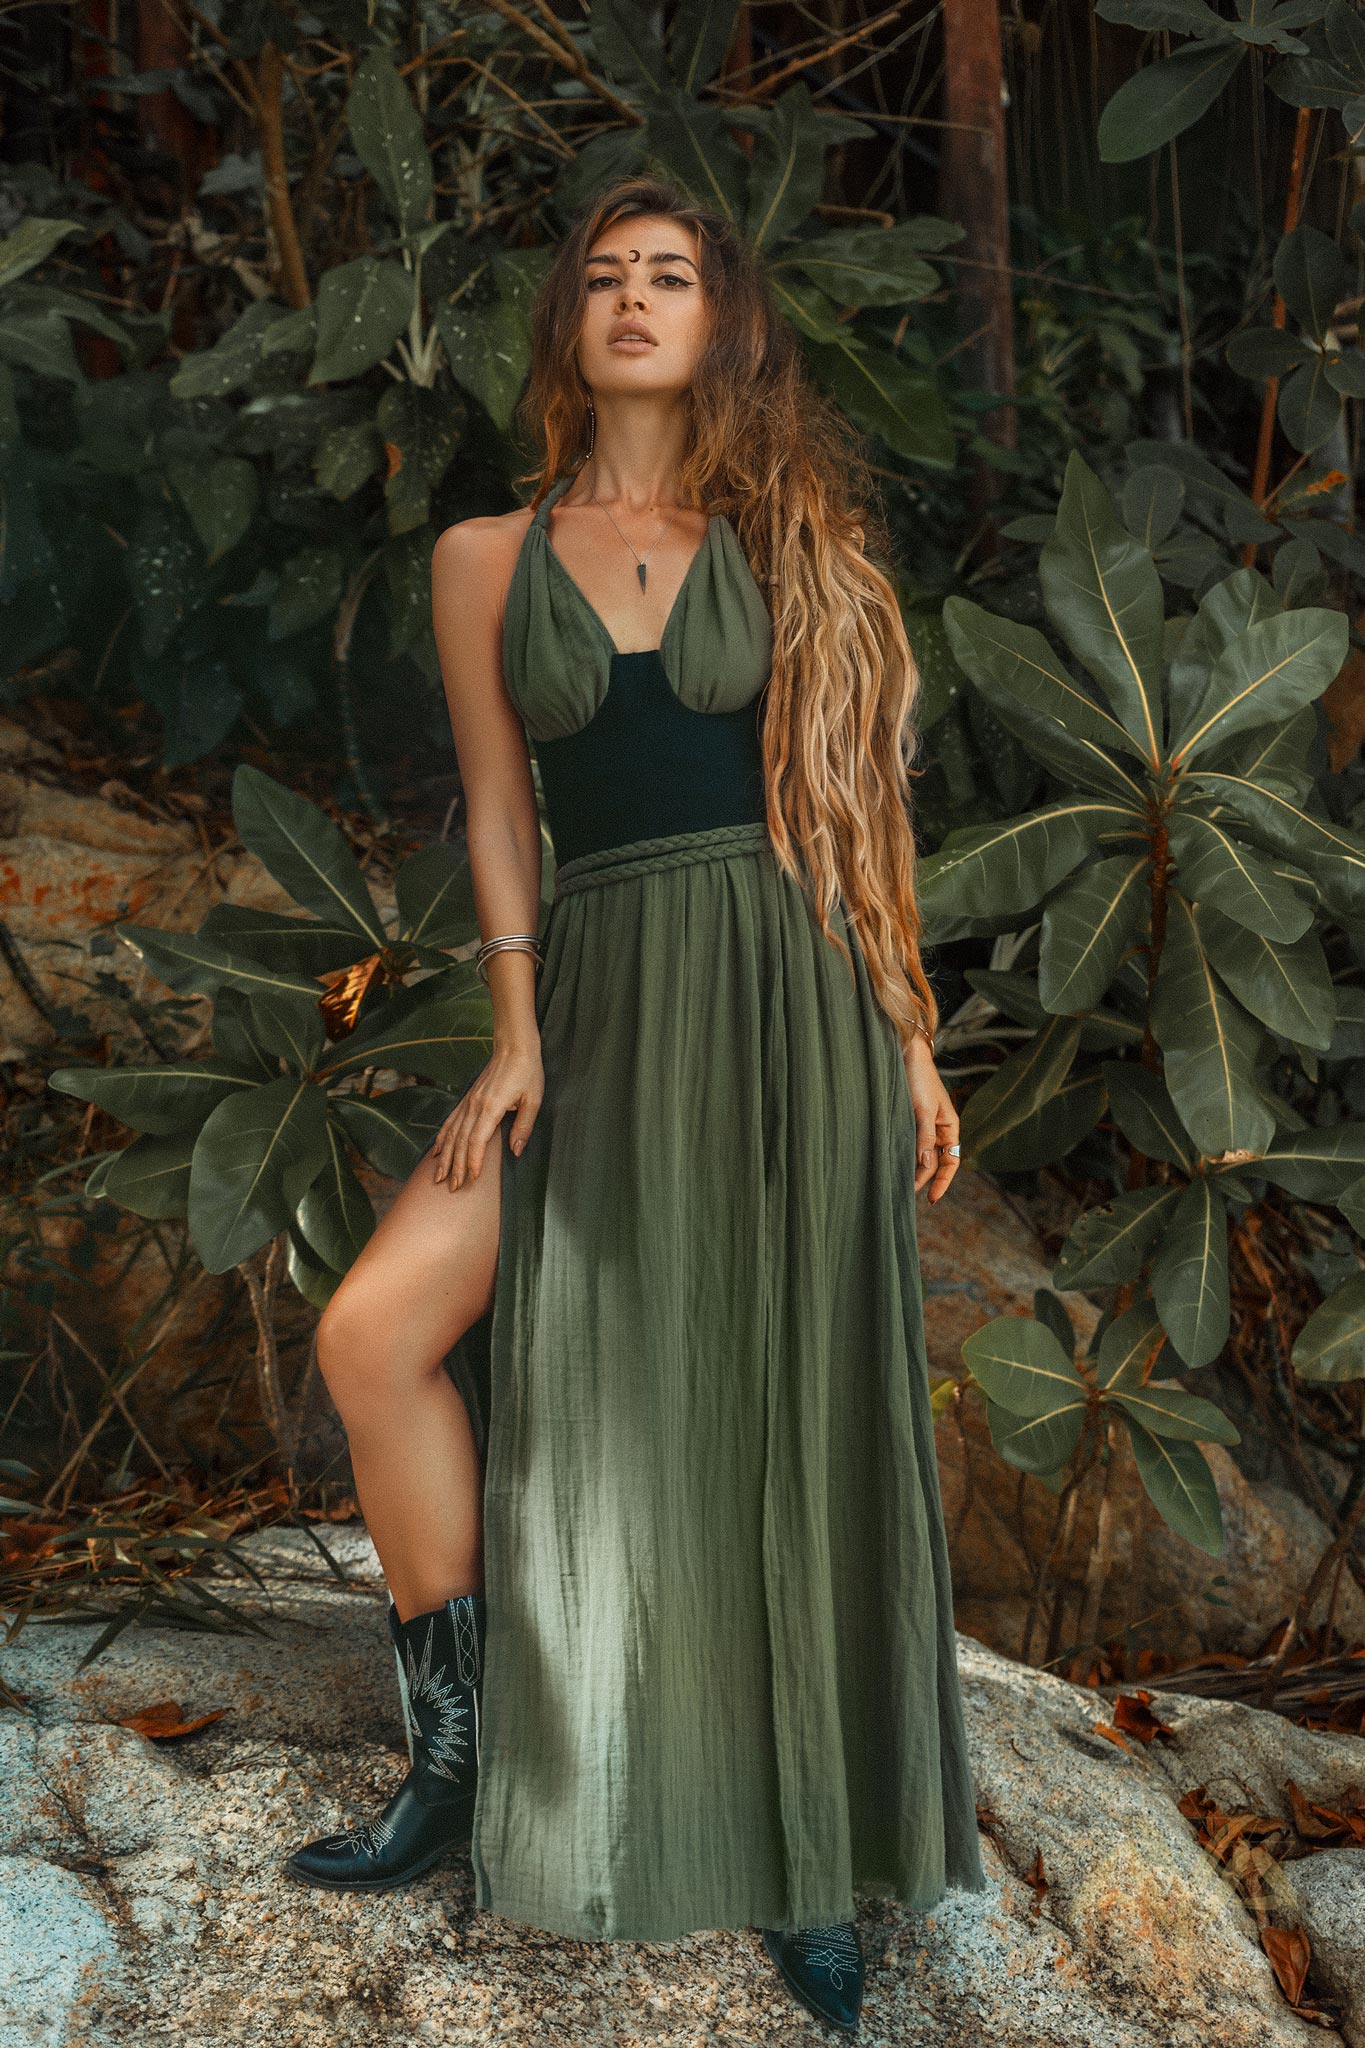 Valhalla Forest Green Sequin Lace-Up Maxi Dress | Prom dress inspiration,  Green formal dresses, Pretty dresses